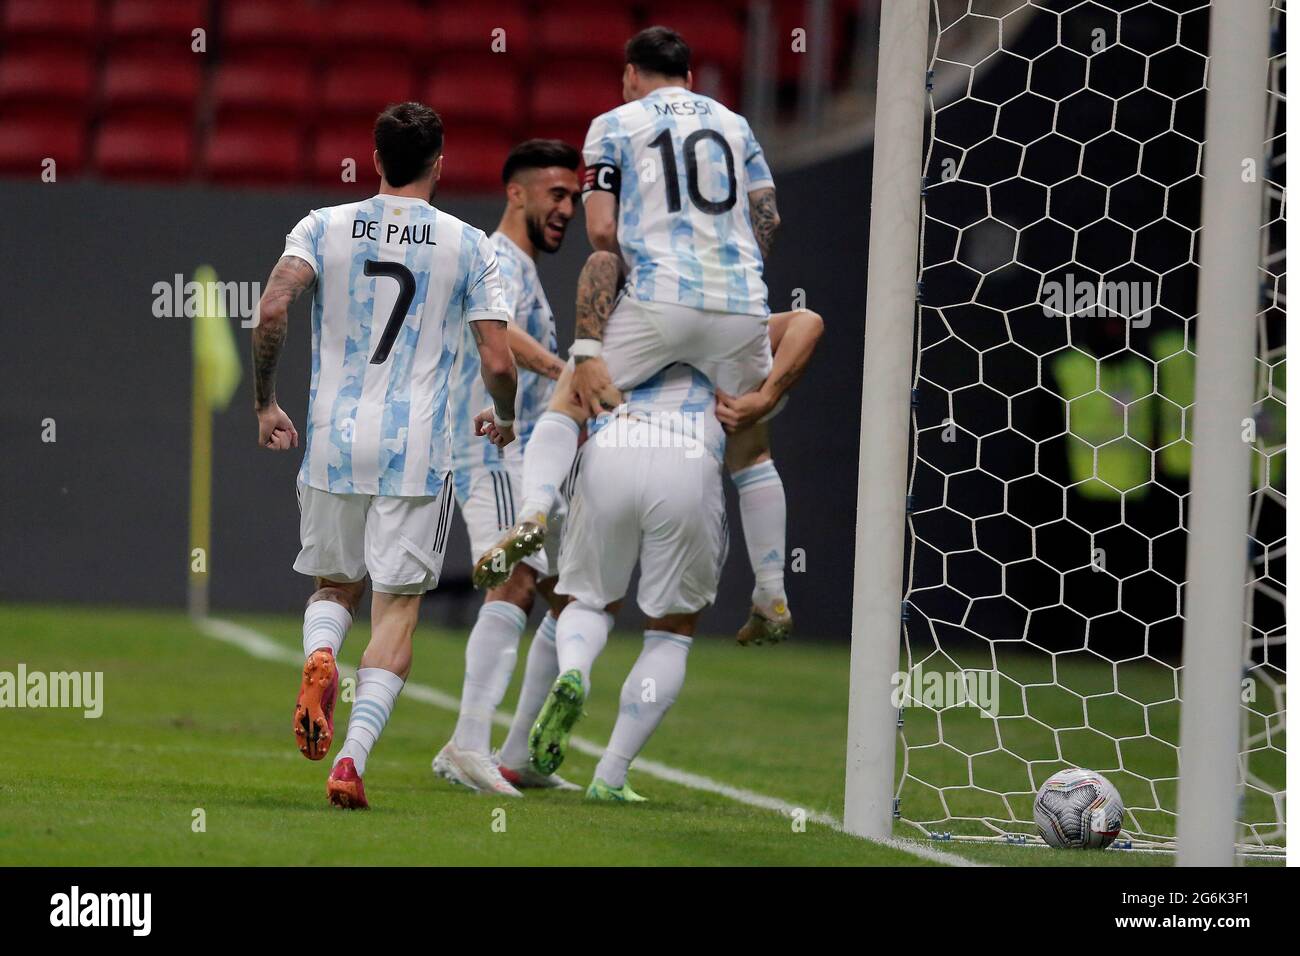 BRAZIL - 06.07.2021: ARGENTINA V COLOMBIA - Match between, Argentina x Colombia valid semi final match Copa America Brazil 2021, held at Estádio Nacional Mané Garricha, on Tuesday (6th). In the photo, Player Messi and Latauro Martinez celebrating Argentina's goal (Photo: Francisco Stuckert/Fotoarena) Stock Photo